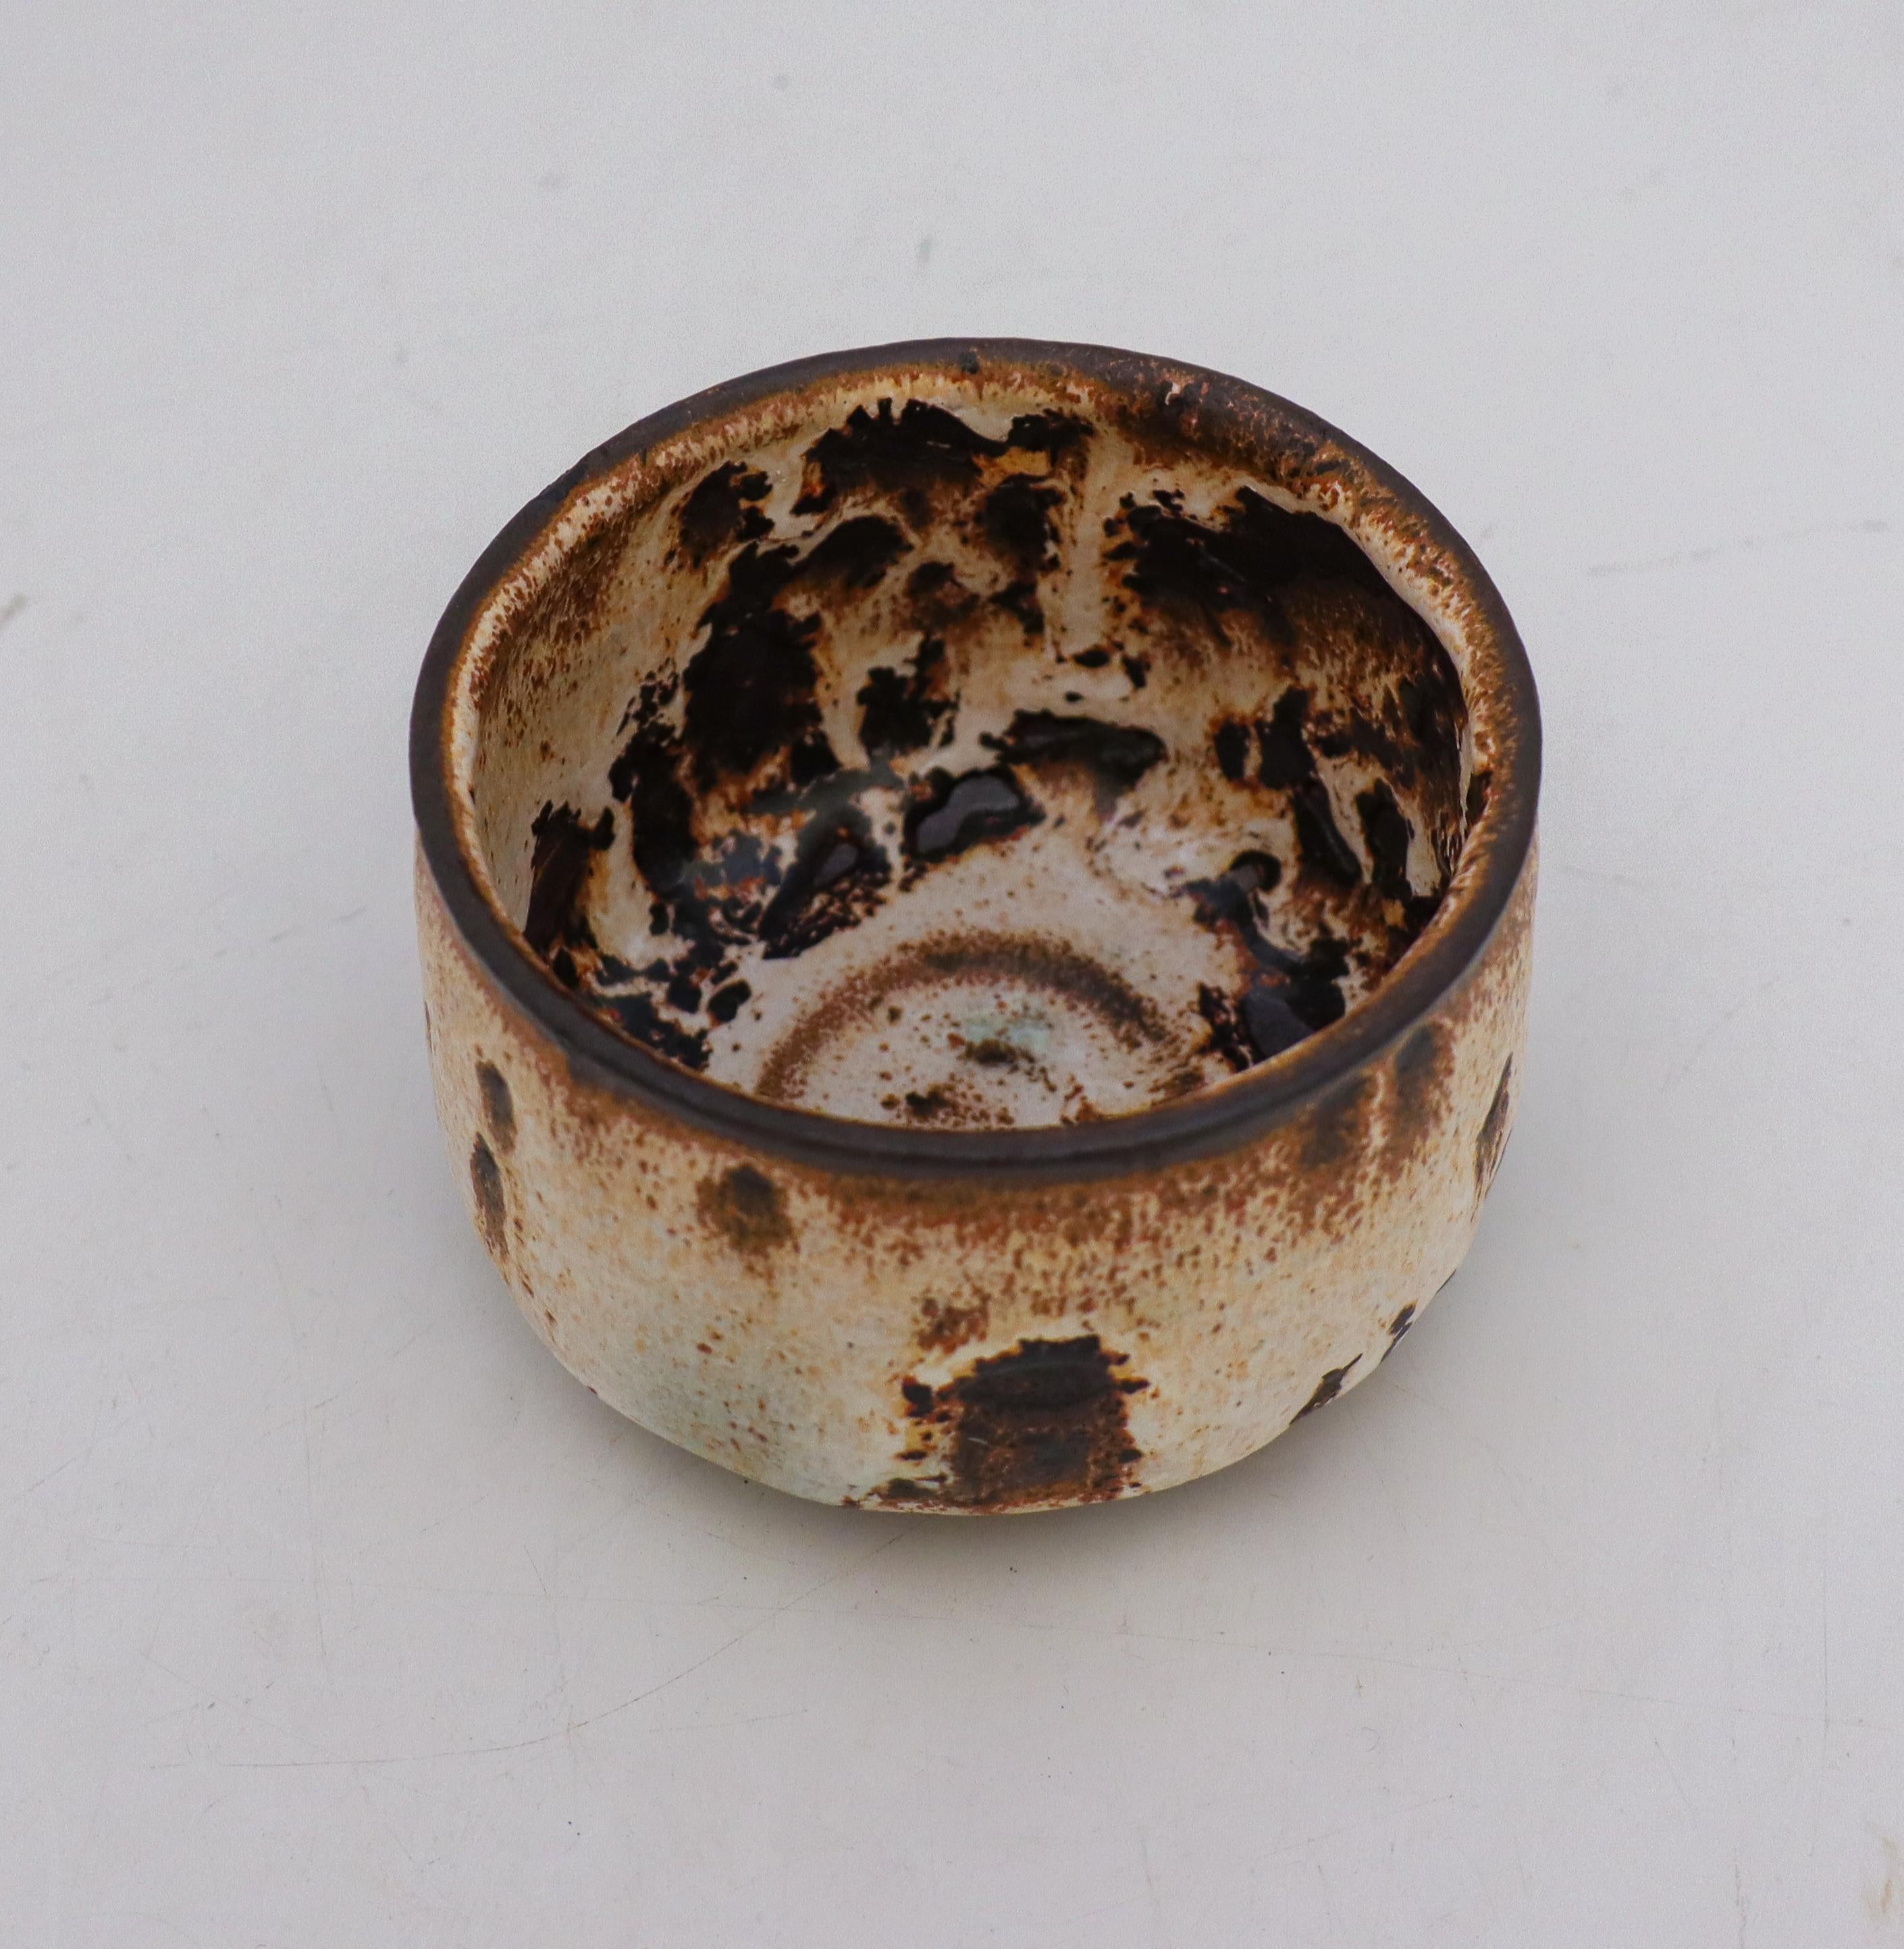 Isak Isaksson White & Brown Chawan Tea Bowl in Box, Contemporary Ceramicist For Sale 2